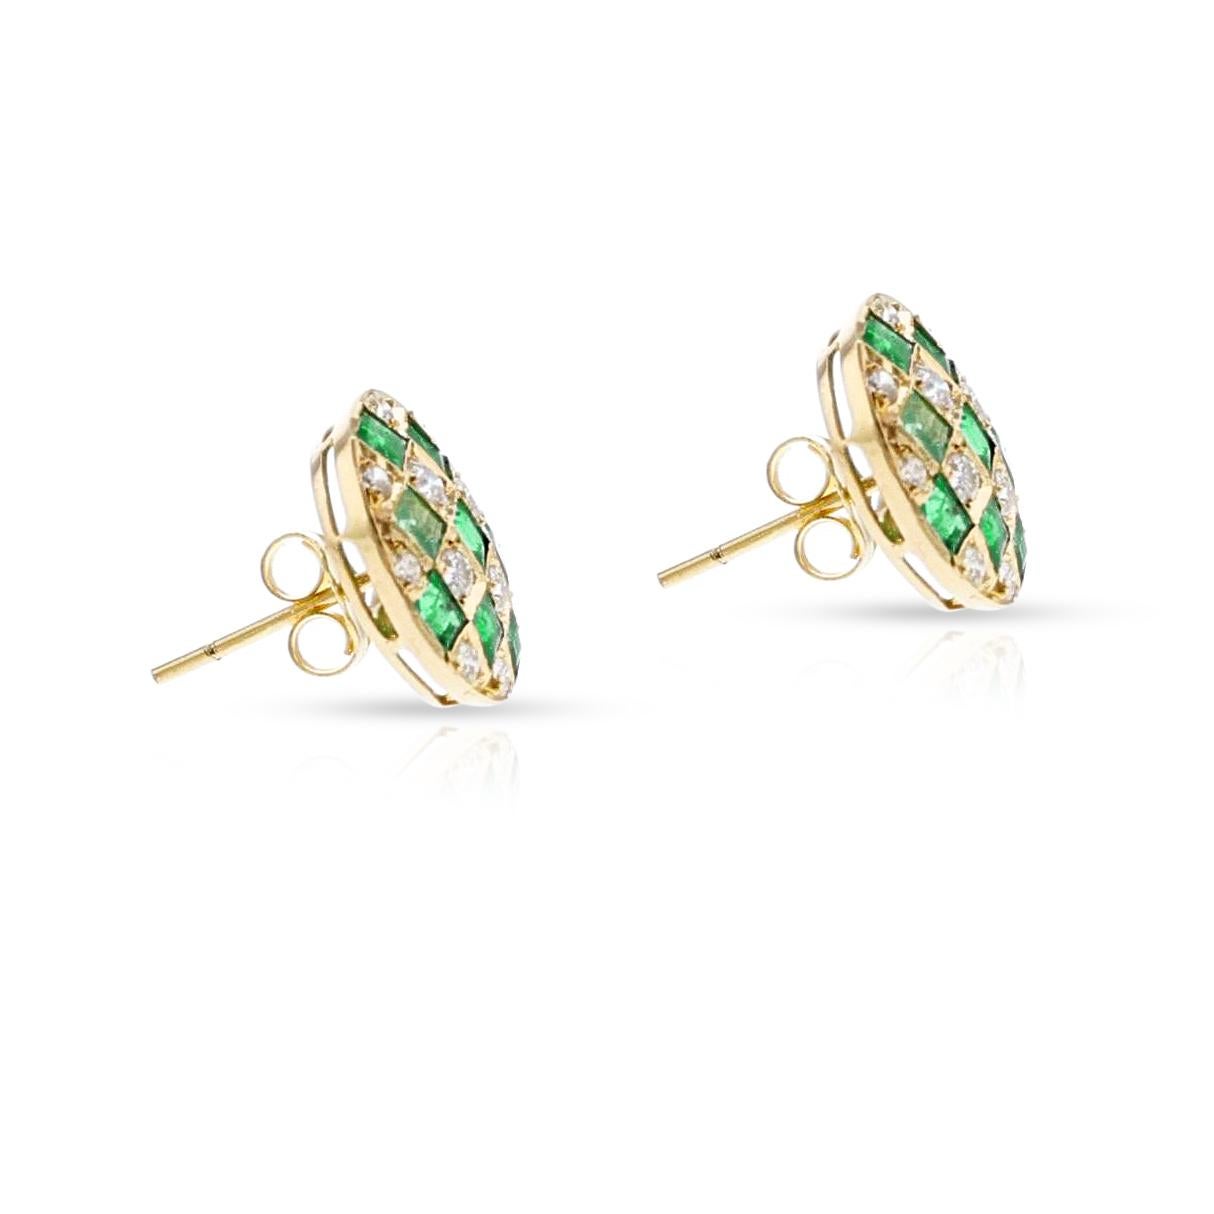 Emerald and Diamond Checkerboard Stud Earrings, 18k In Excellent Condition For Sale In New York, NY